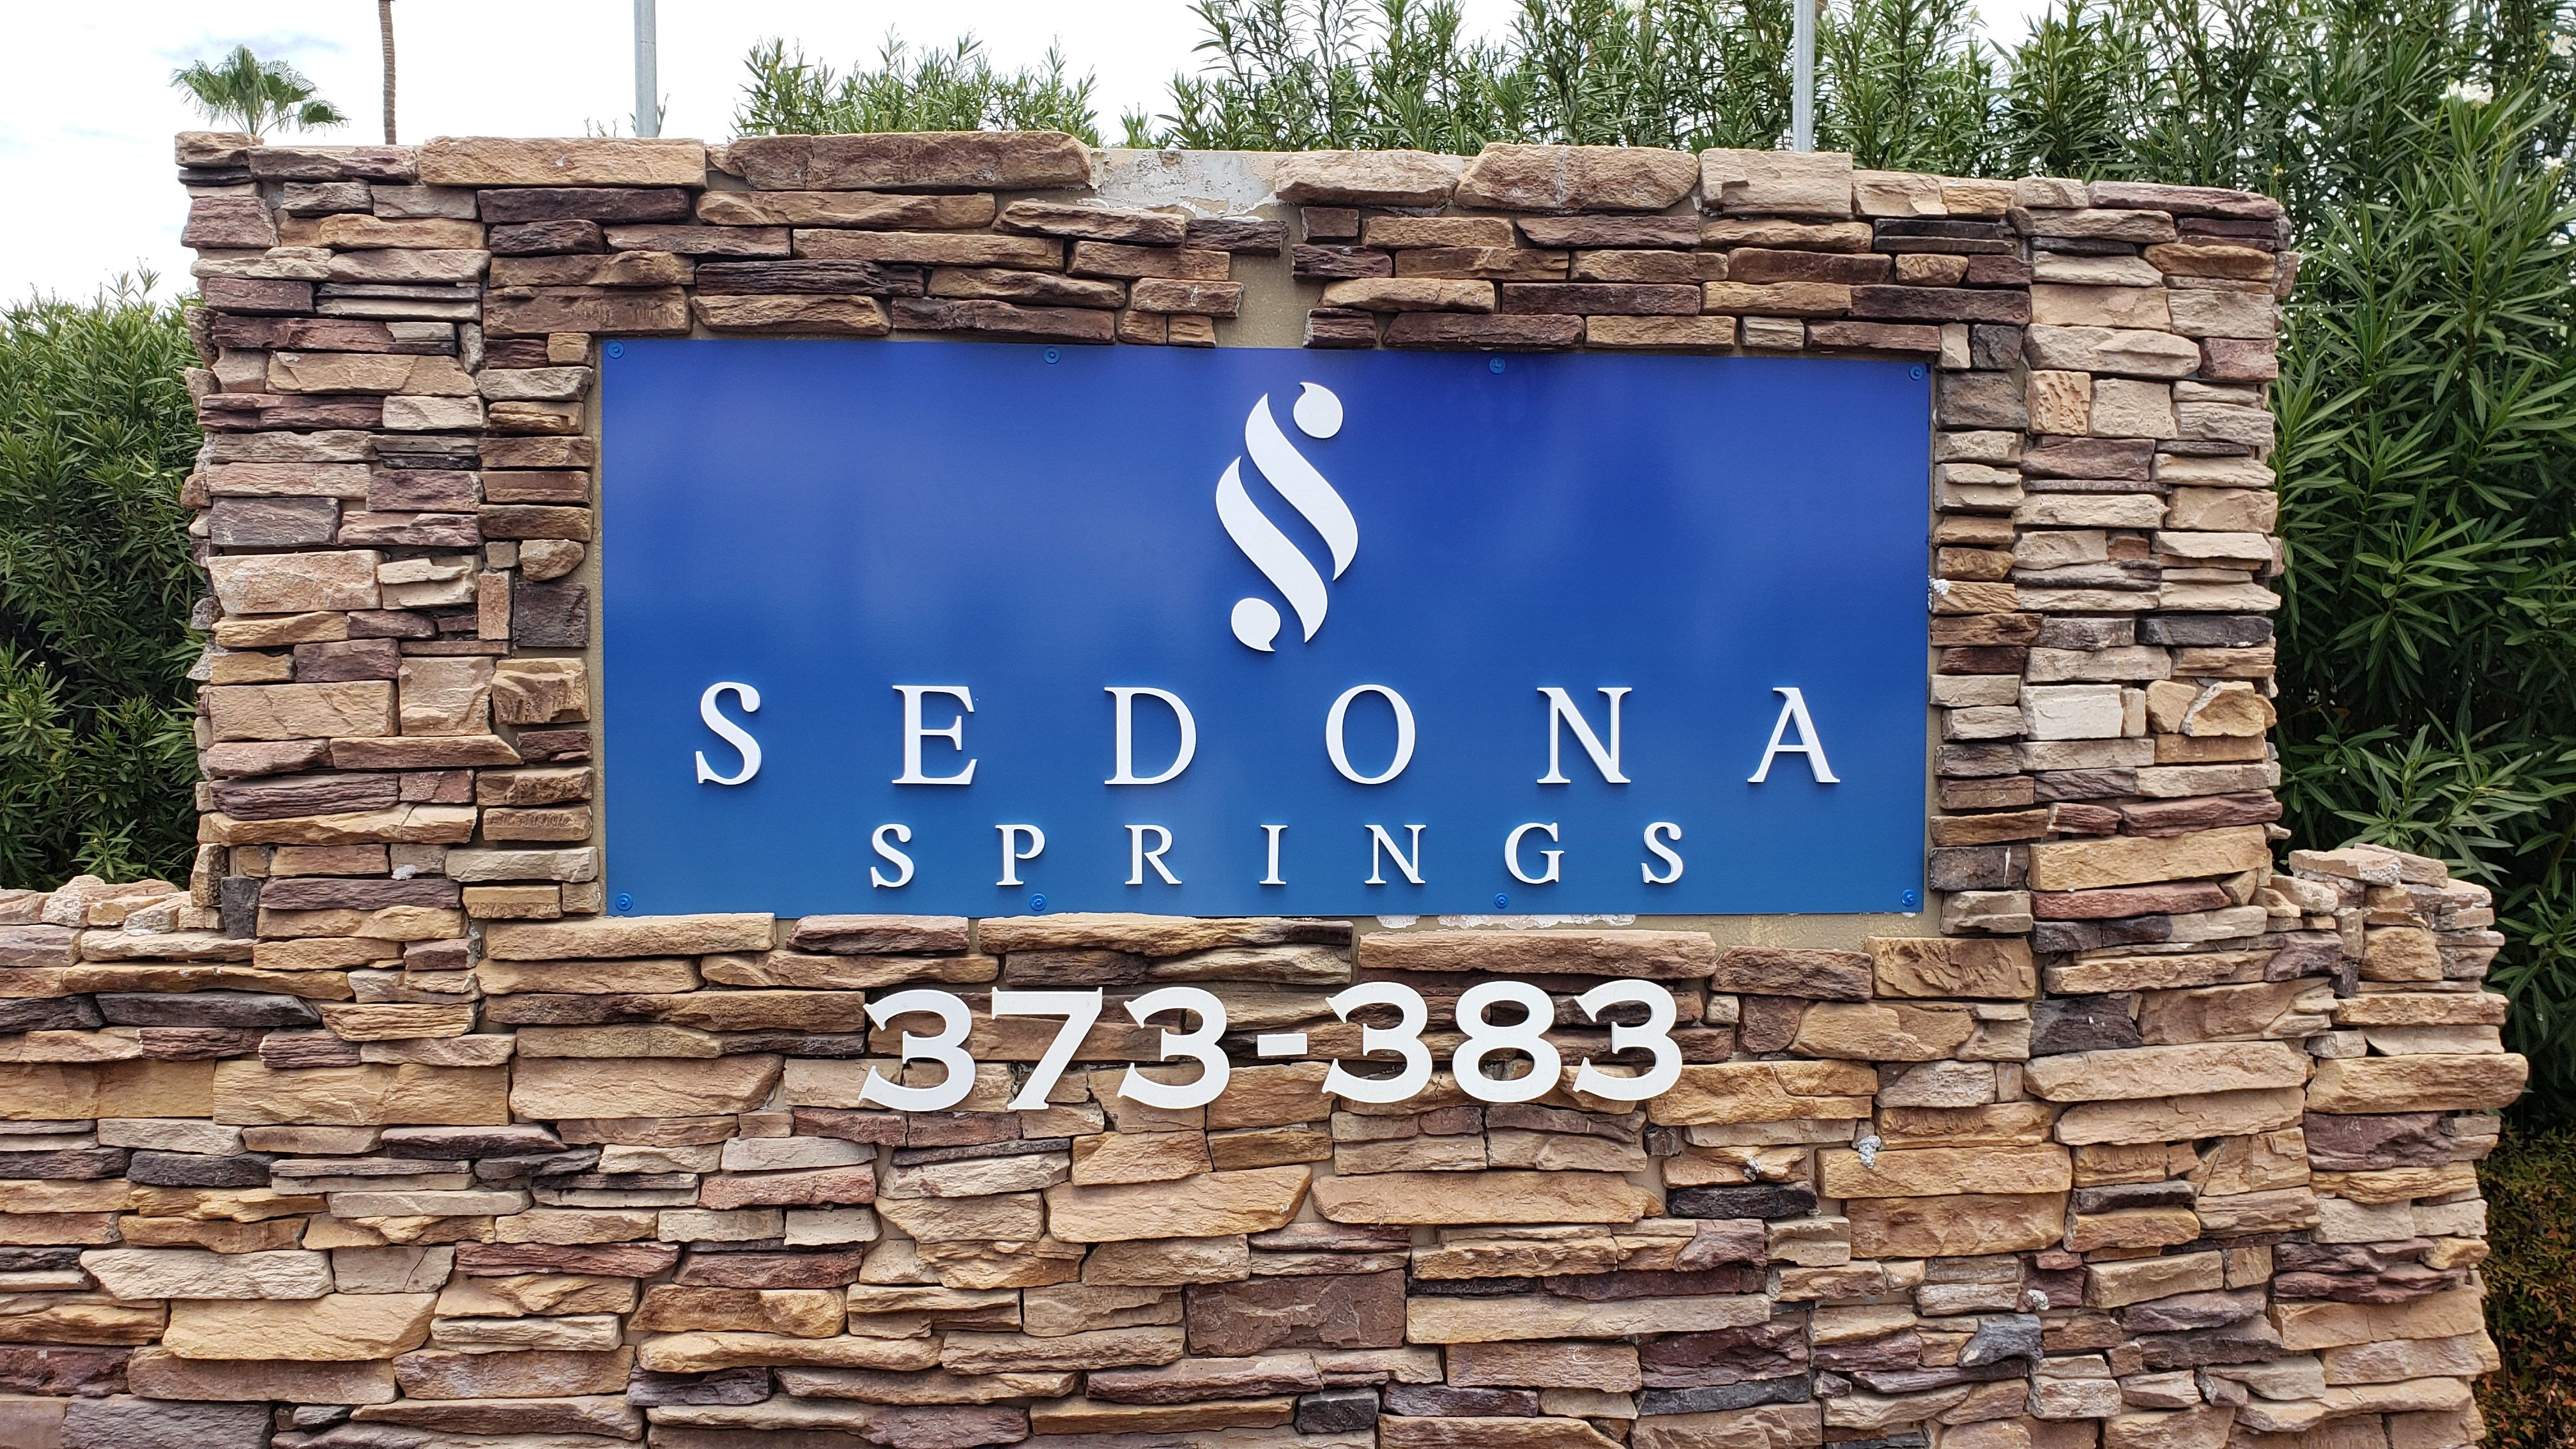 Property Management & Apartment Signs - Graphics and Display Solutions